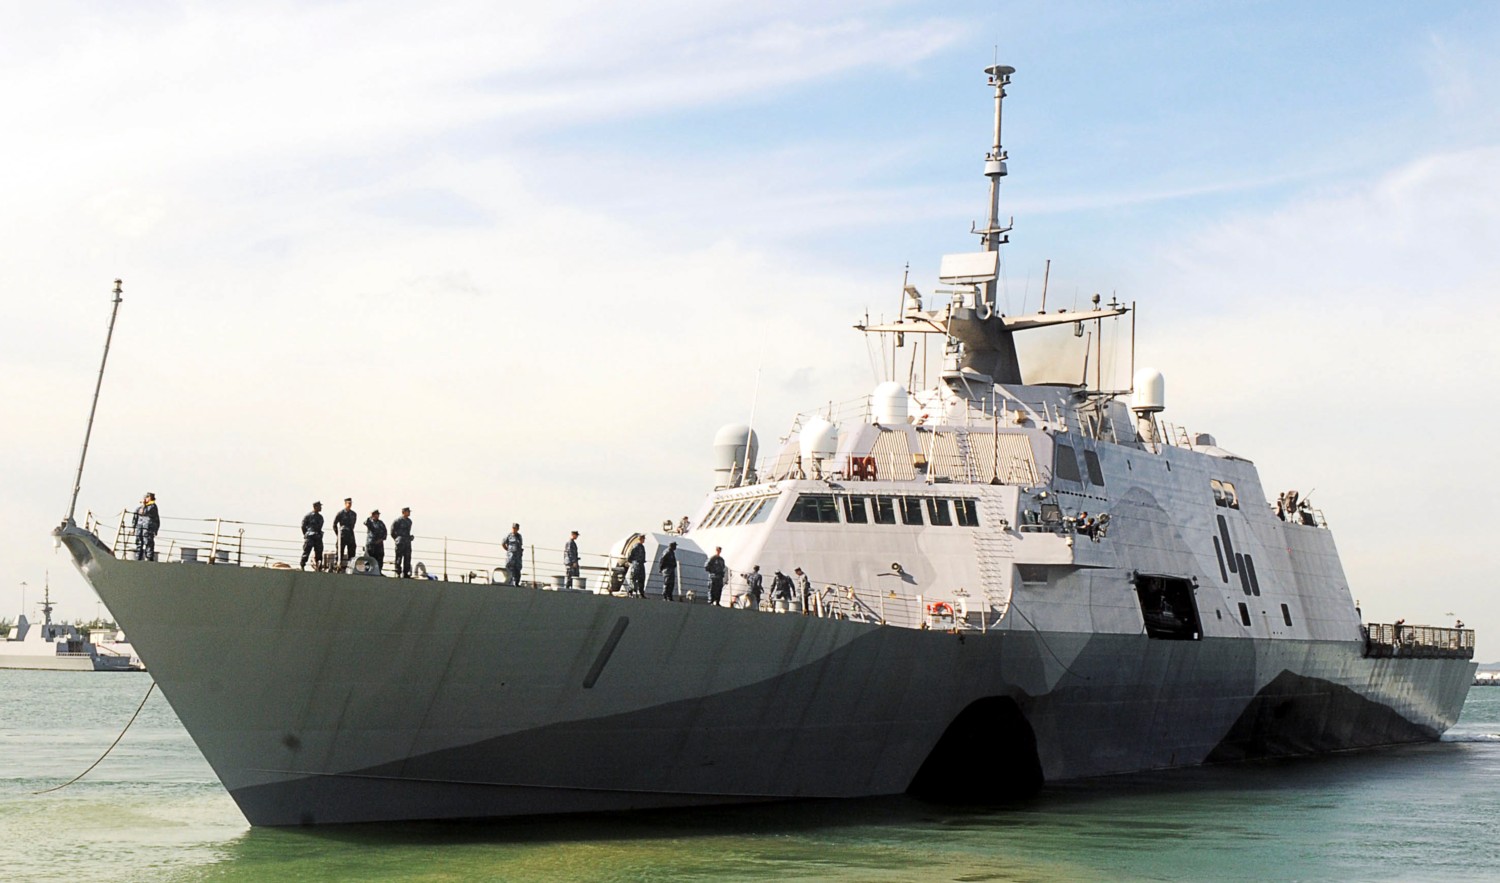 lcs-1 uss freedom class littoral combat ship us navy 33 changi naval base singapore